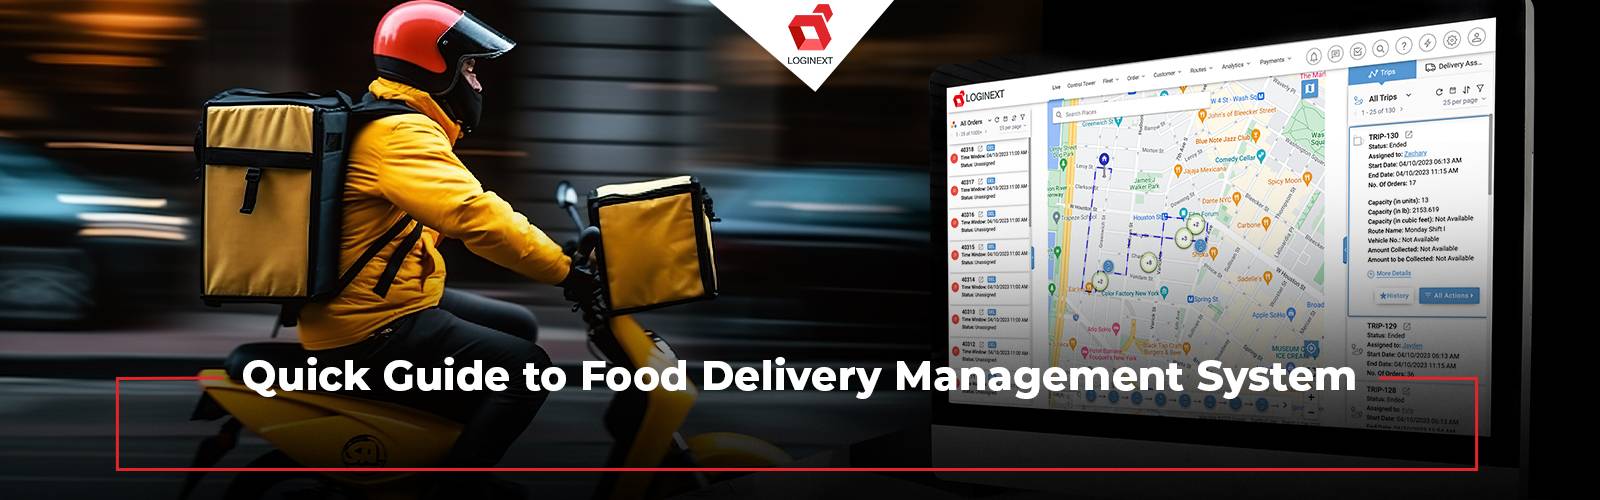 White Paper - Food Delivery Management System